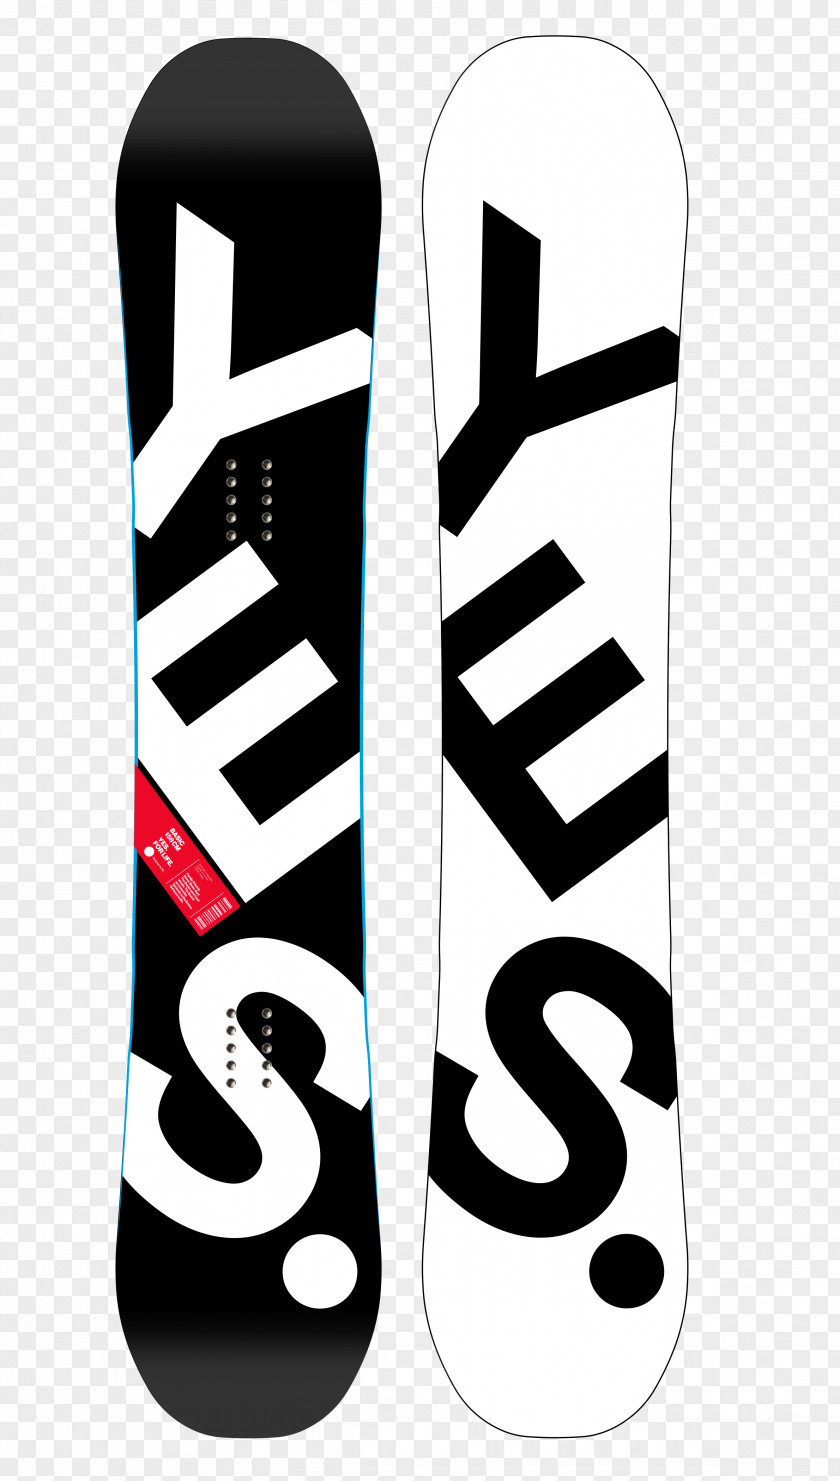 Snowboard YES Snowboards Snowboarding At The 2018 Olympic Winter Games Skateboard PNG